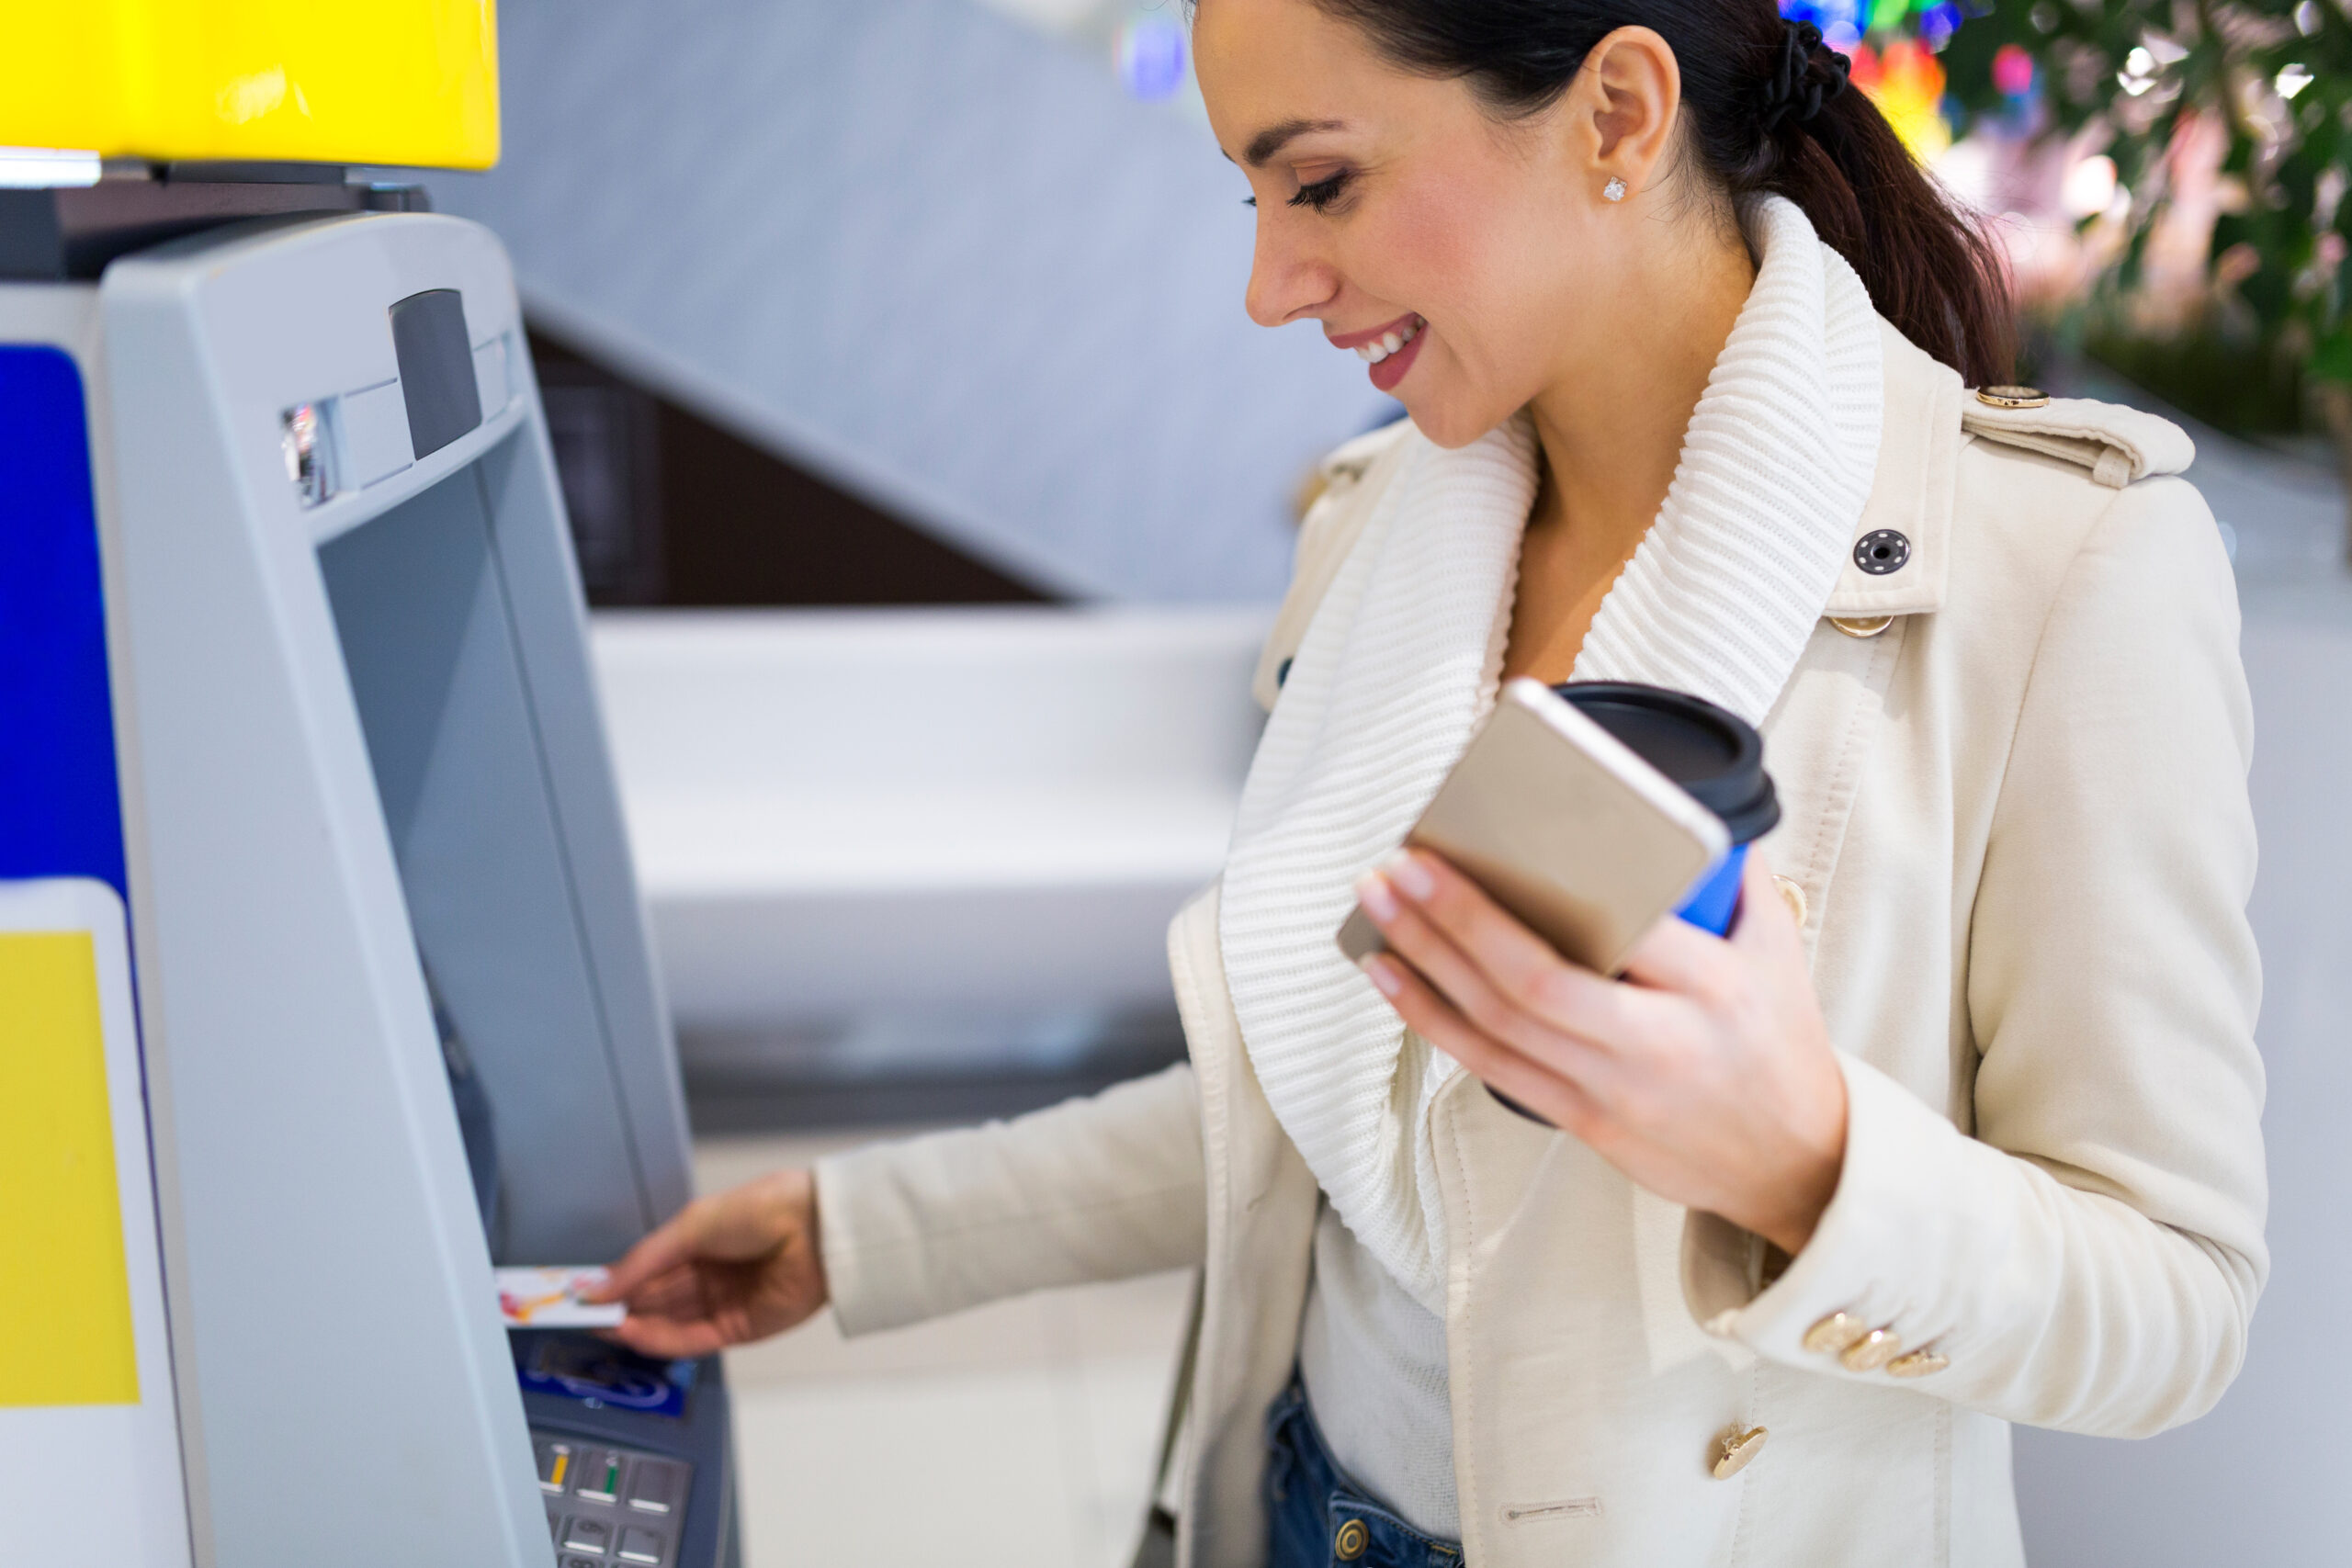 ATM improves customer experience